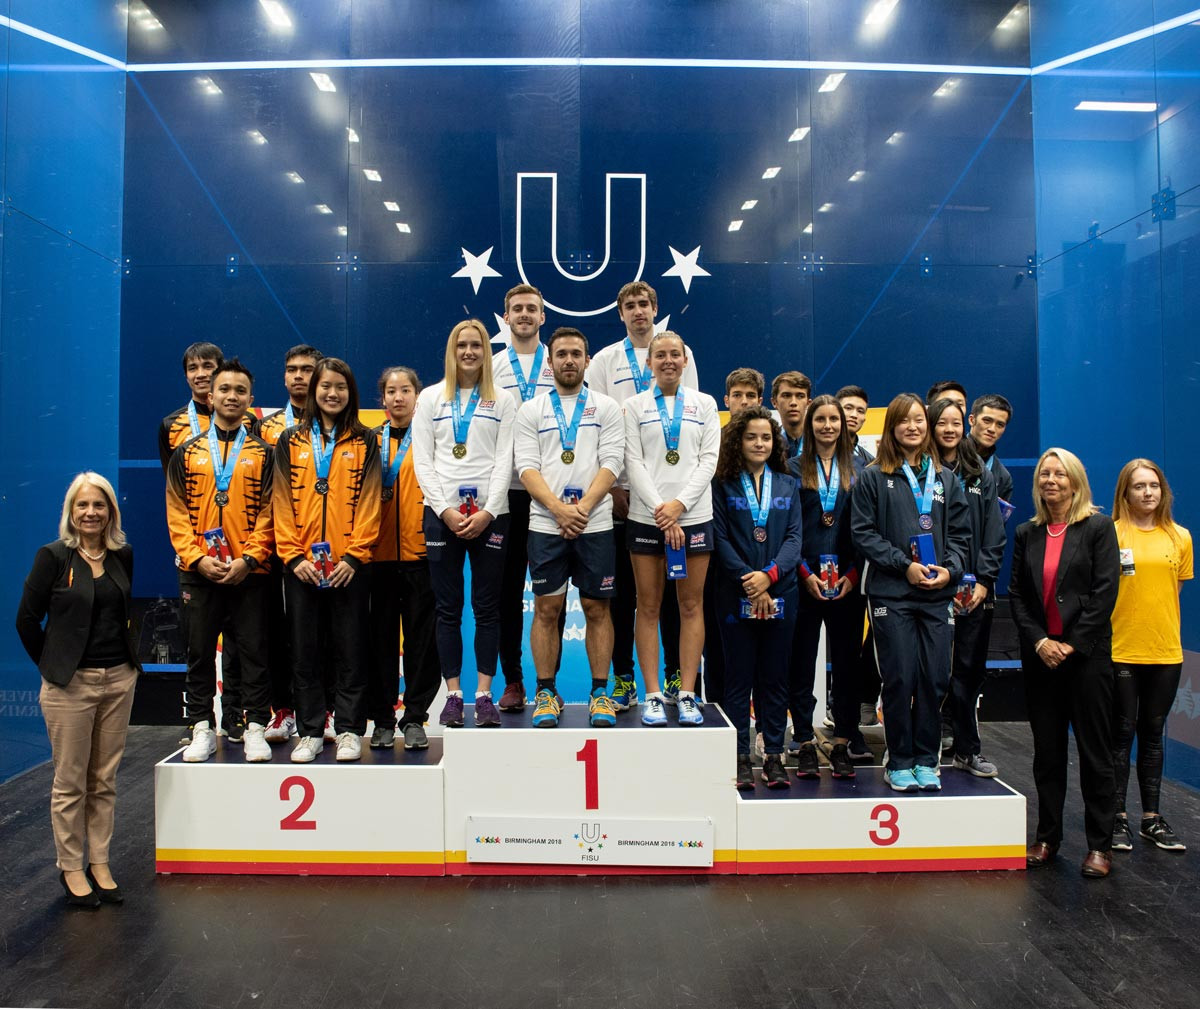 Hosts Britain completed the clean sweep at the World University Squash Championships ©FISU